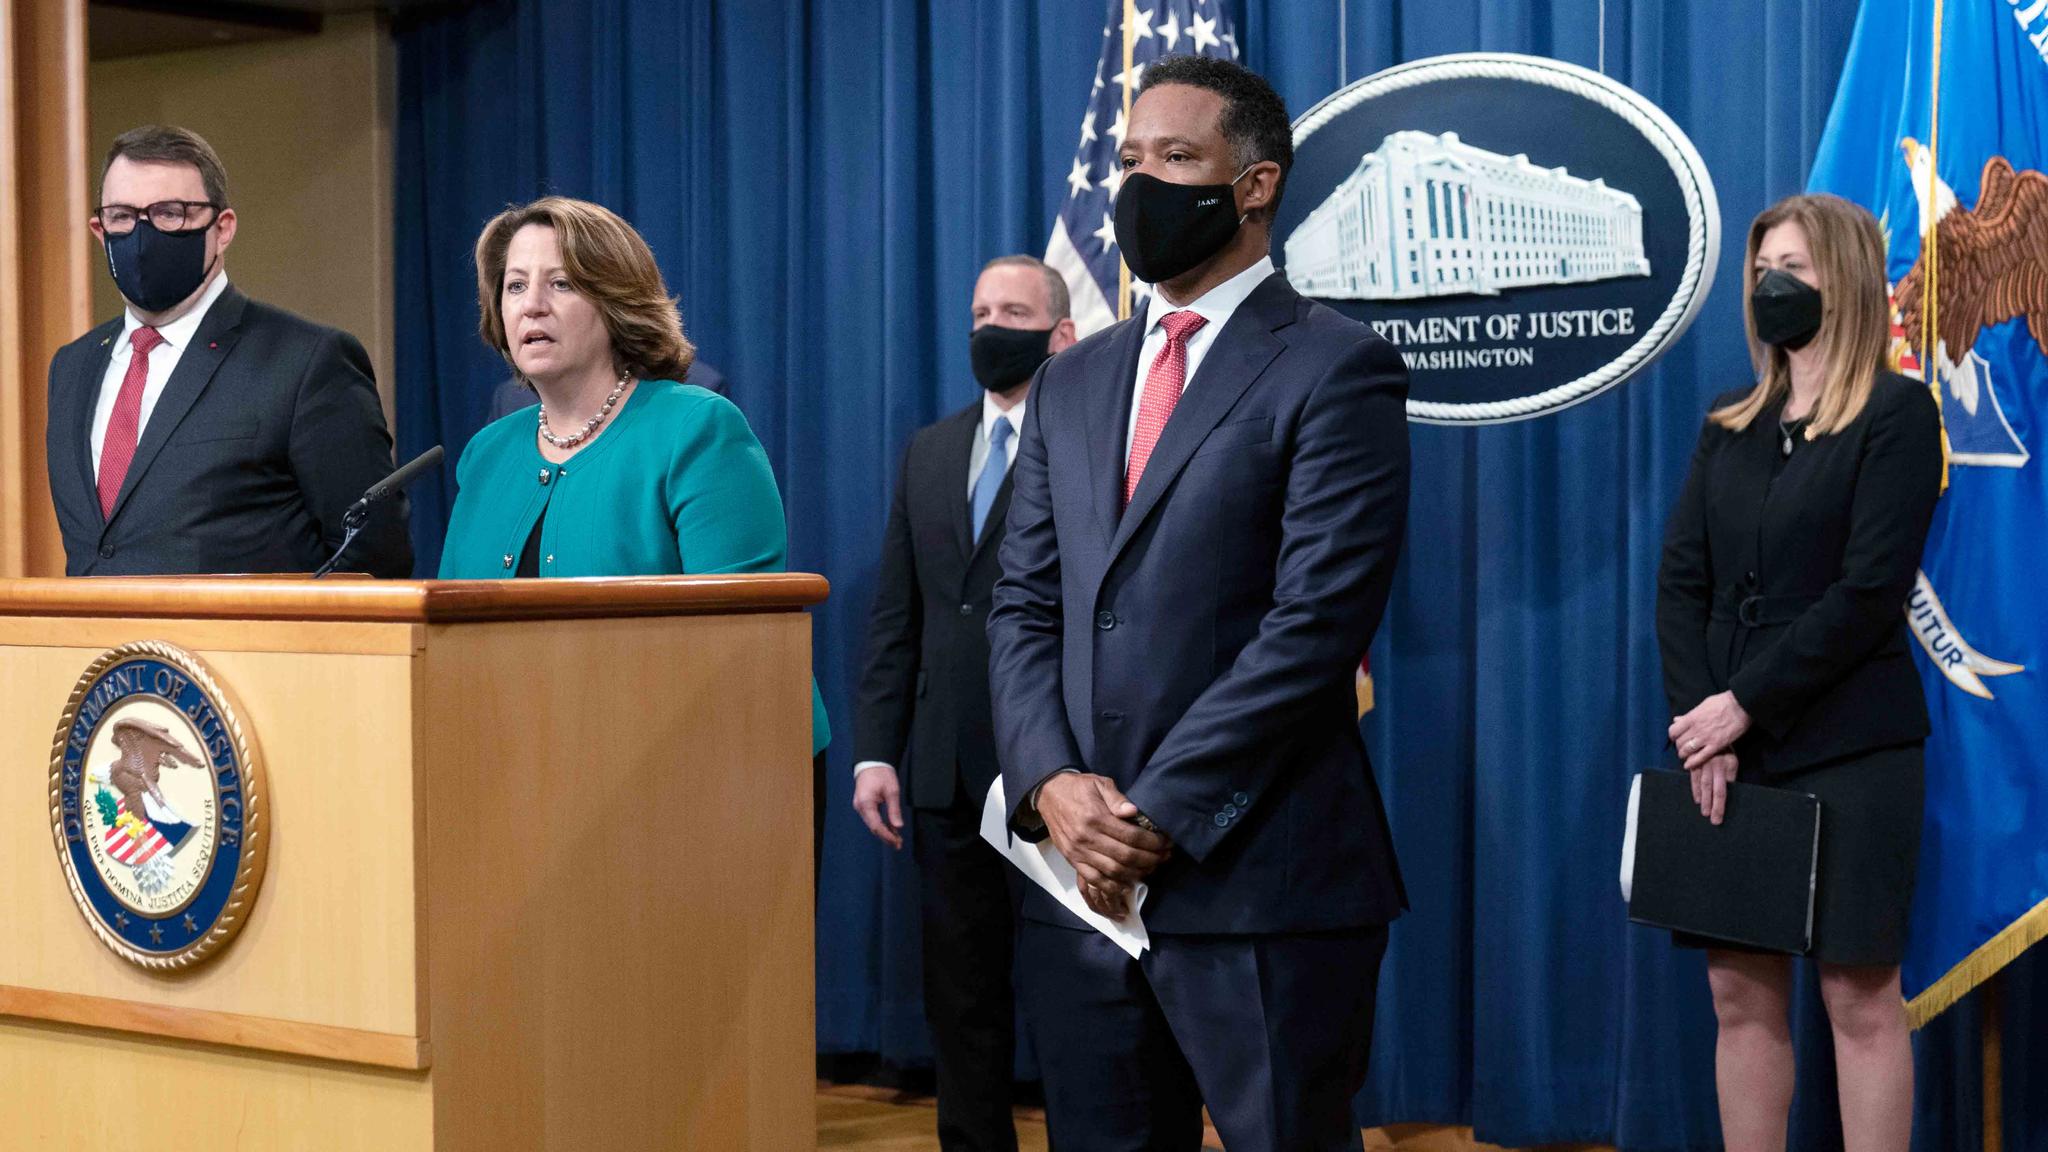 Deputy Attorney General Lisa Monaco, second from left, together with, from left, Deputy Executive Director Jean-Philippe Lecouffe of Europol; FBI Deputy Director Paul Abbate; Assistant Attorney General Kenneth Polite Jr. of the Justice Department's Criminal Division; and Drug Enforcement Administration Administrator Anne Milgram, speaks during a news at the Department of Justice in Washington, Tuesday, Oct. 26, 2021.